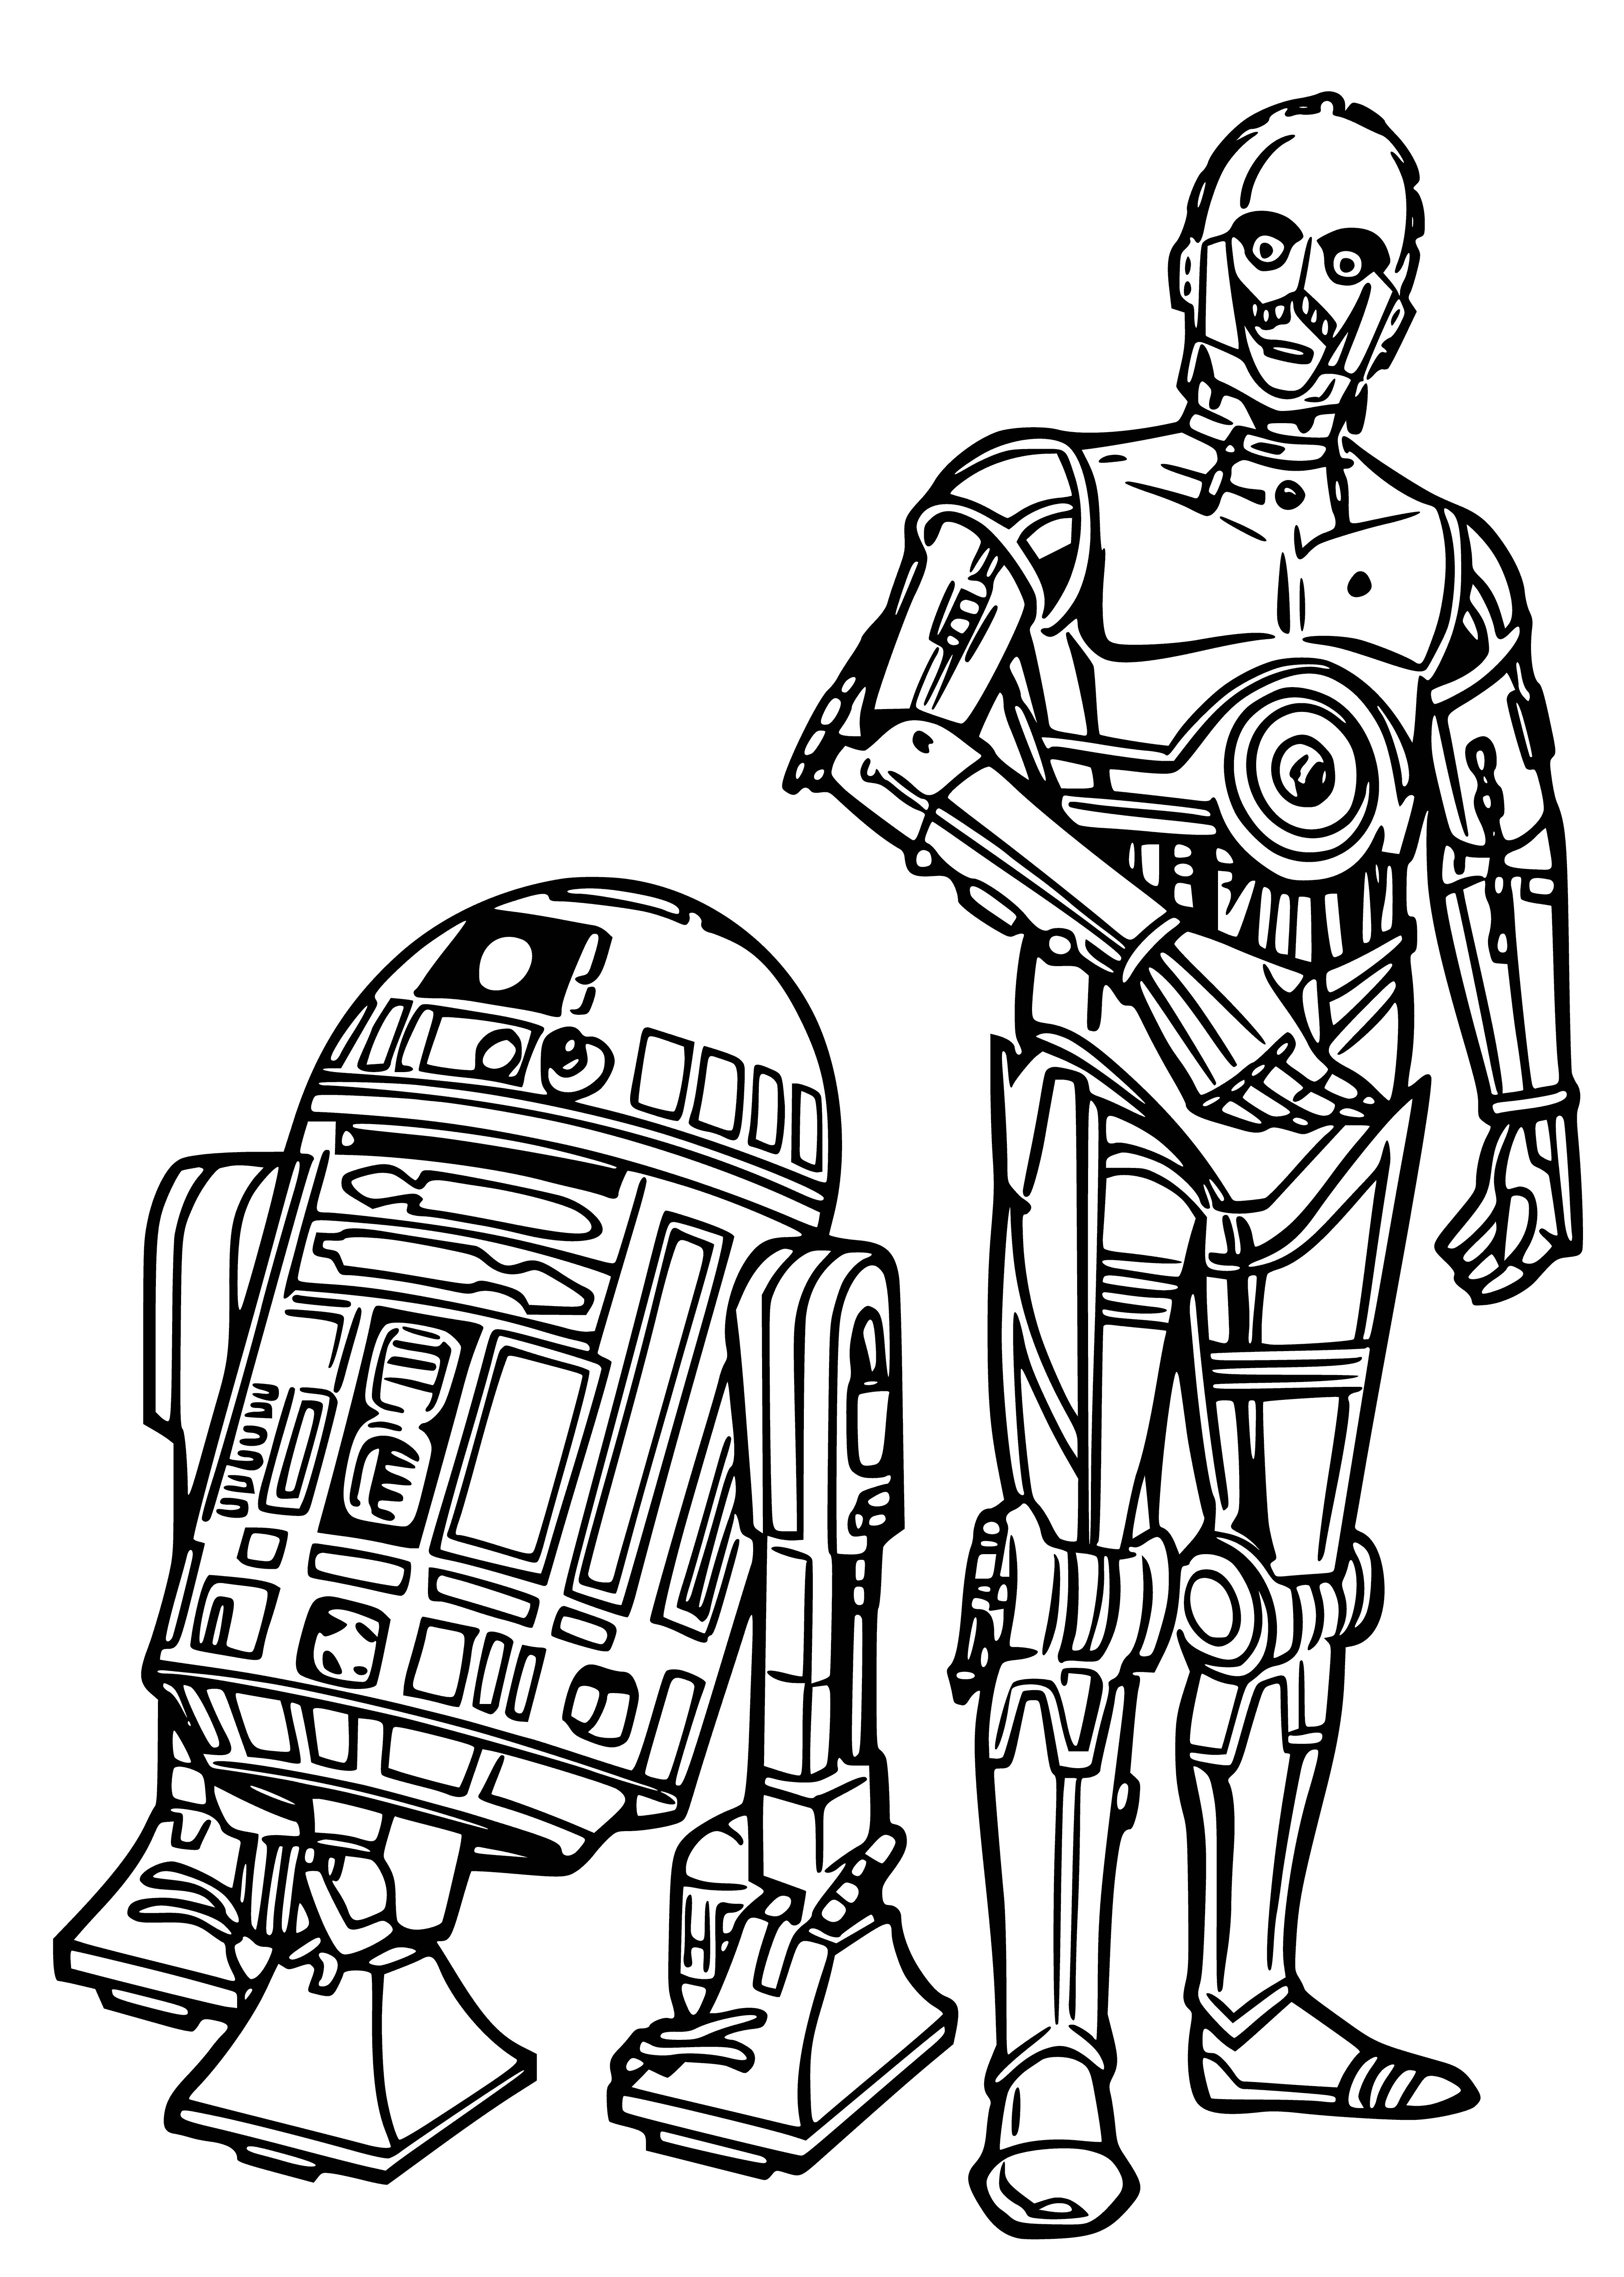 coloring page: Two Star Wars droids, R2-D2 & C-3PO, standing together, eyes closed, arms extended & at side, appear in a coloring page.